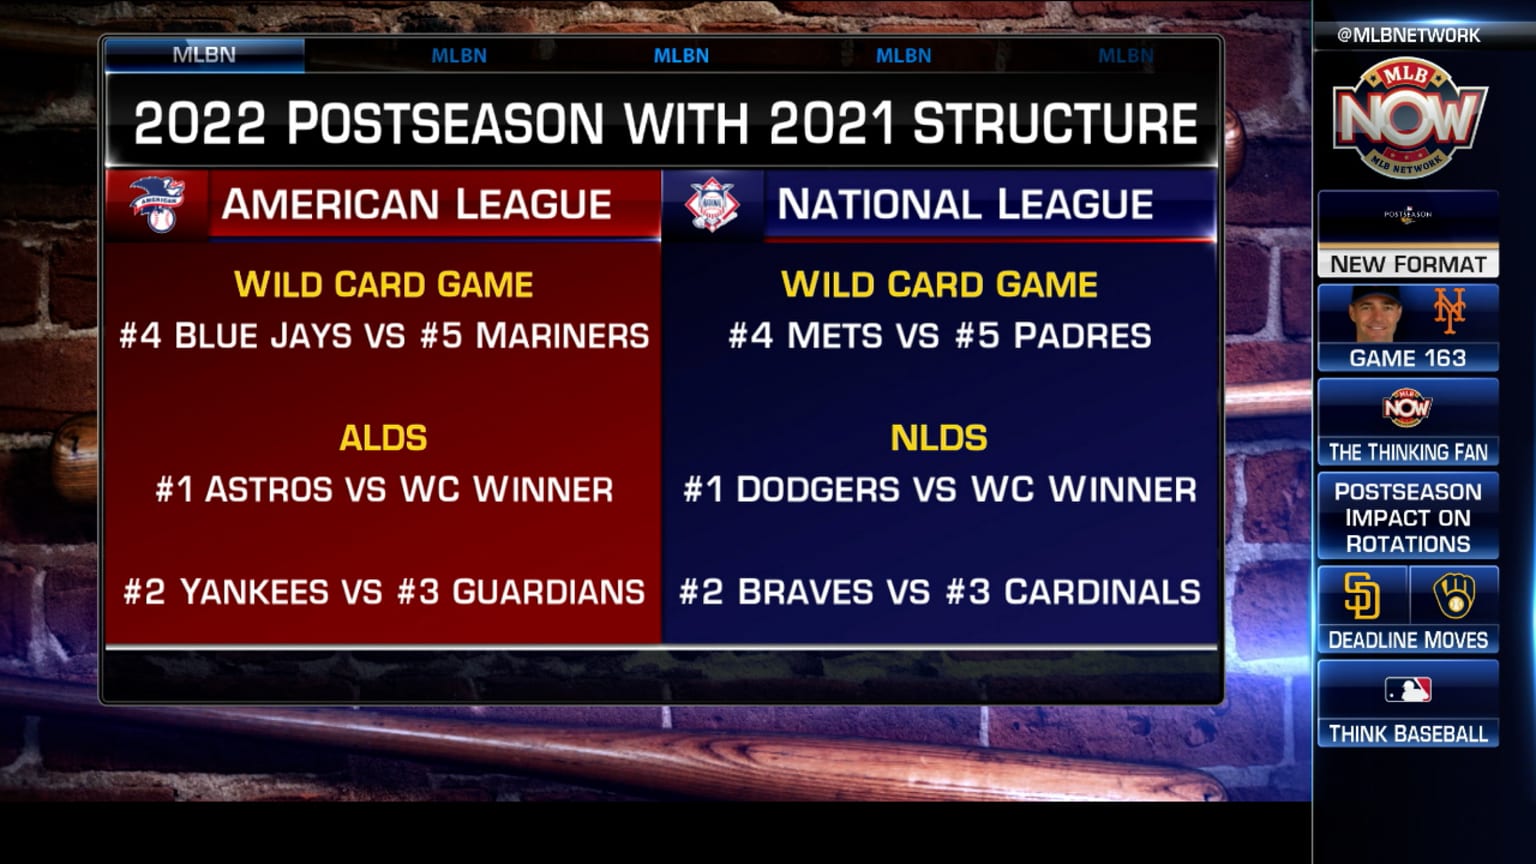 MLB Now on new playoff format 10/05/2022 MLB